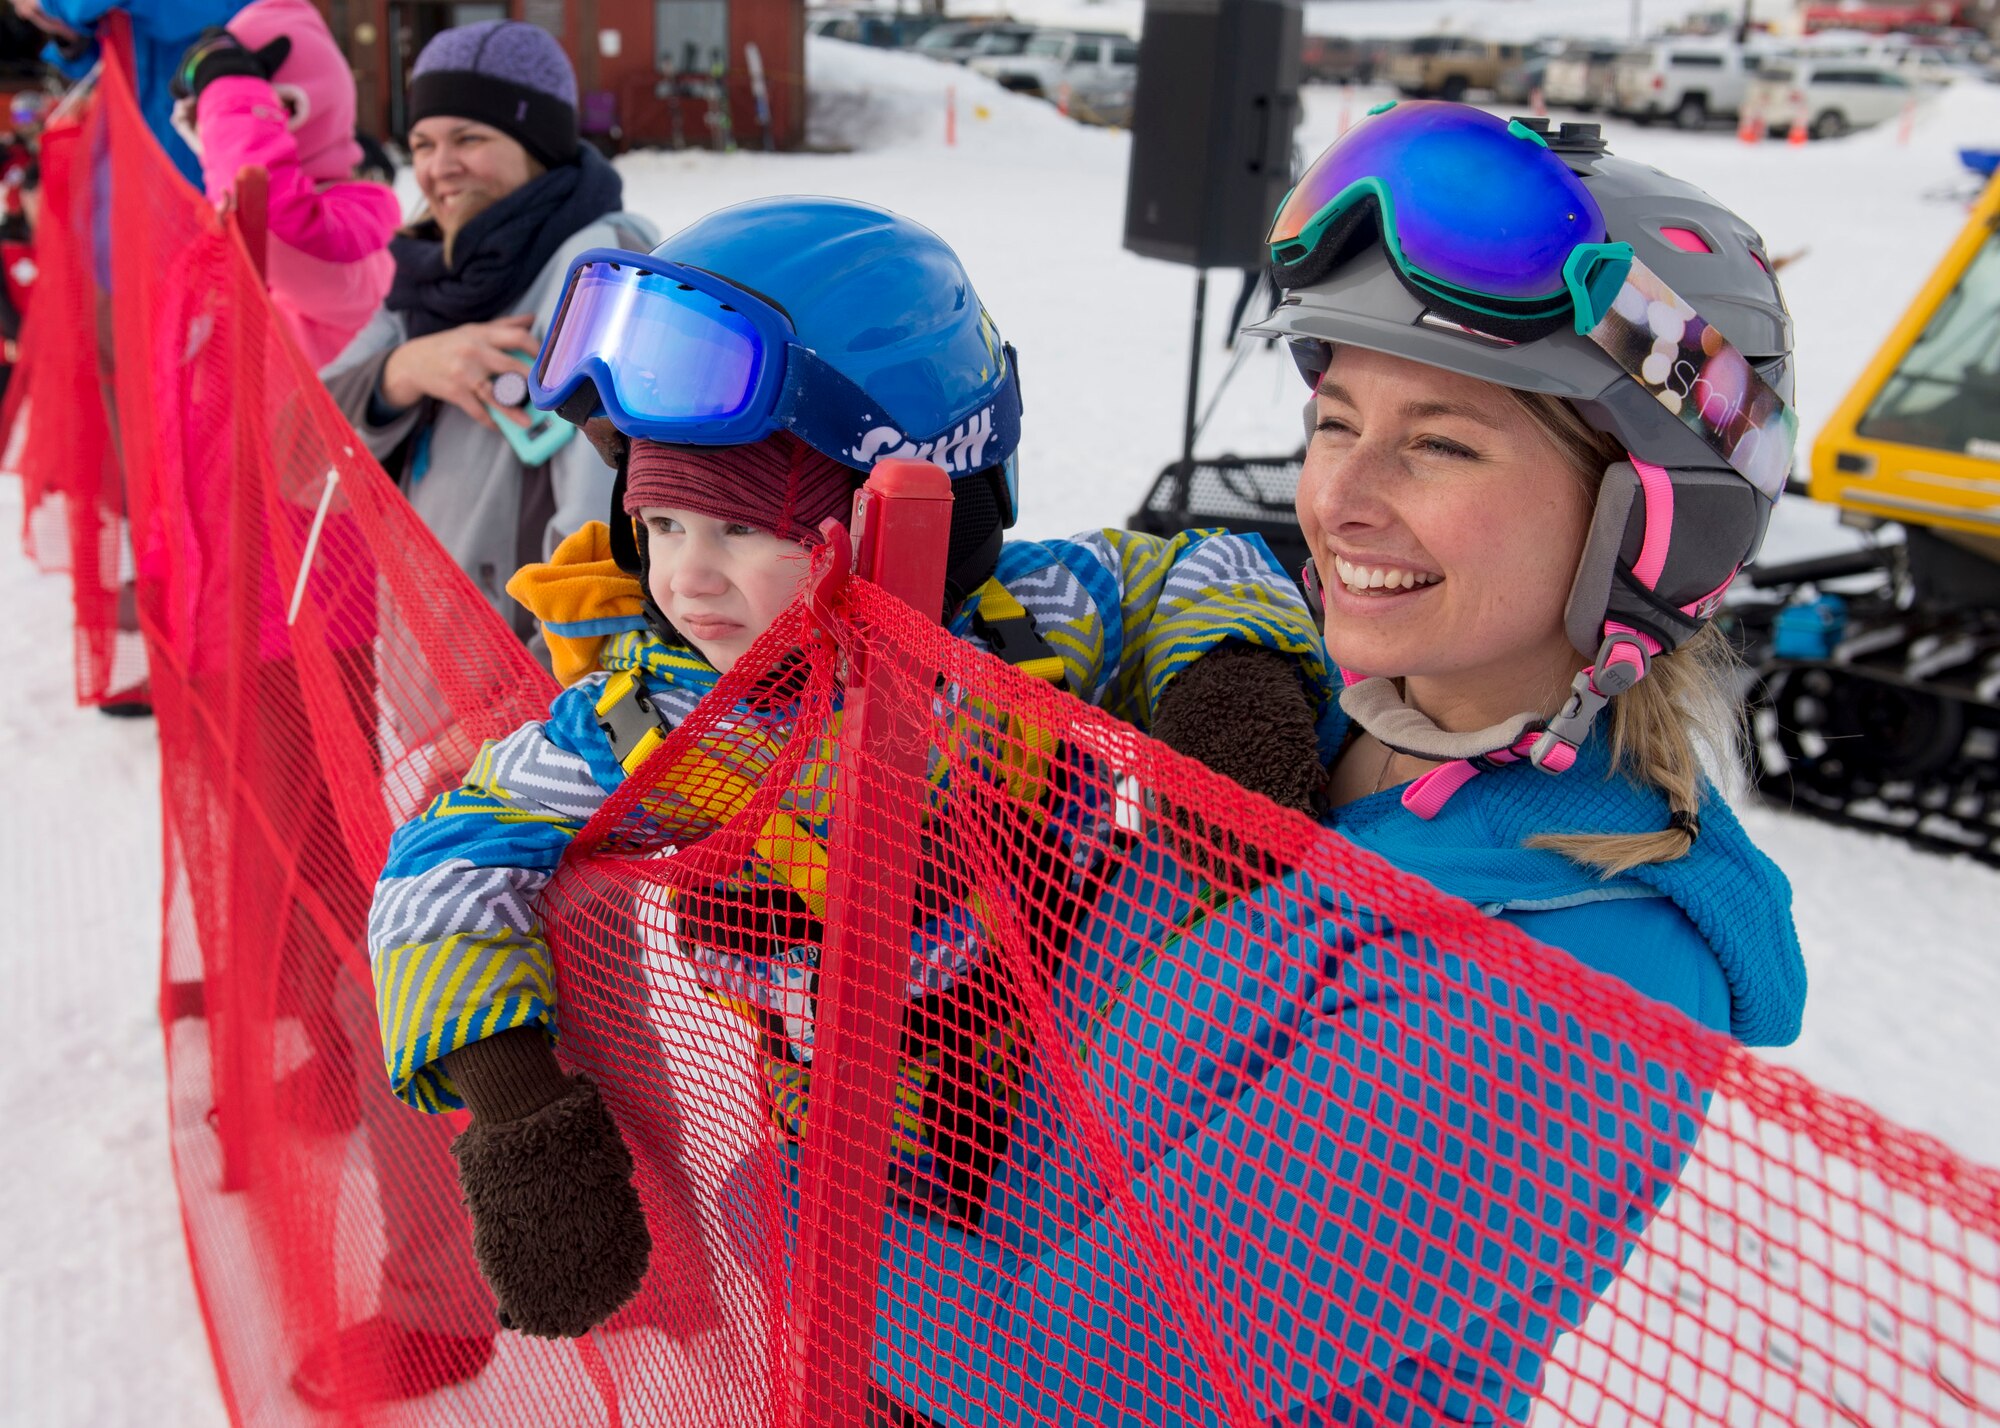 Personnel and families take part in the 2018 Slush Cup at the Joint Base Elmendorf-Richardson Hillberg Ski Area, March 18, 2018. The Slush Cup is a two-fold annual event celebrating the change in weather, consisting of skiers and snowboarders trying to make it across a man-made slush pond without falling.